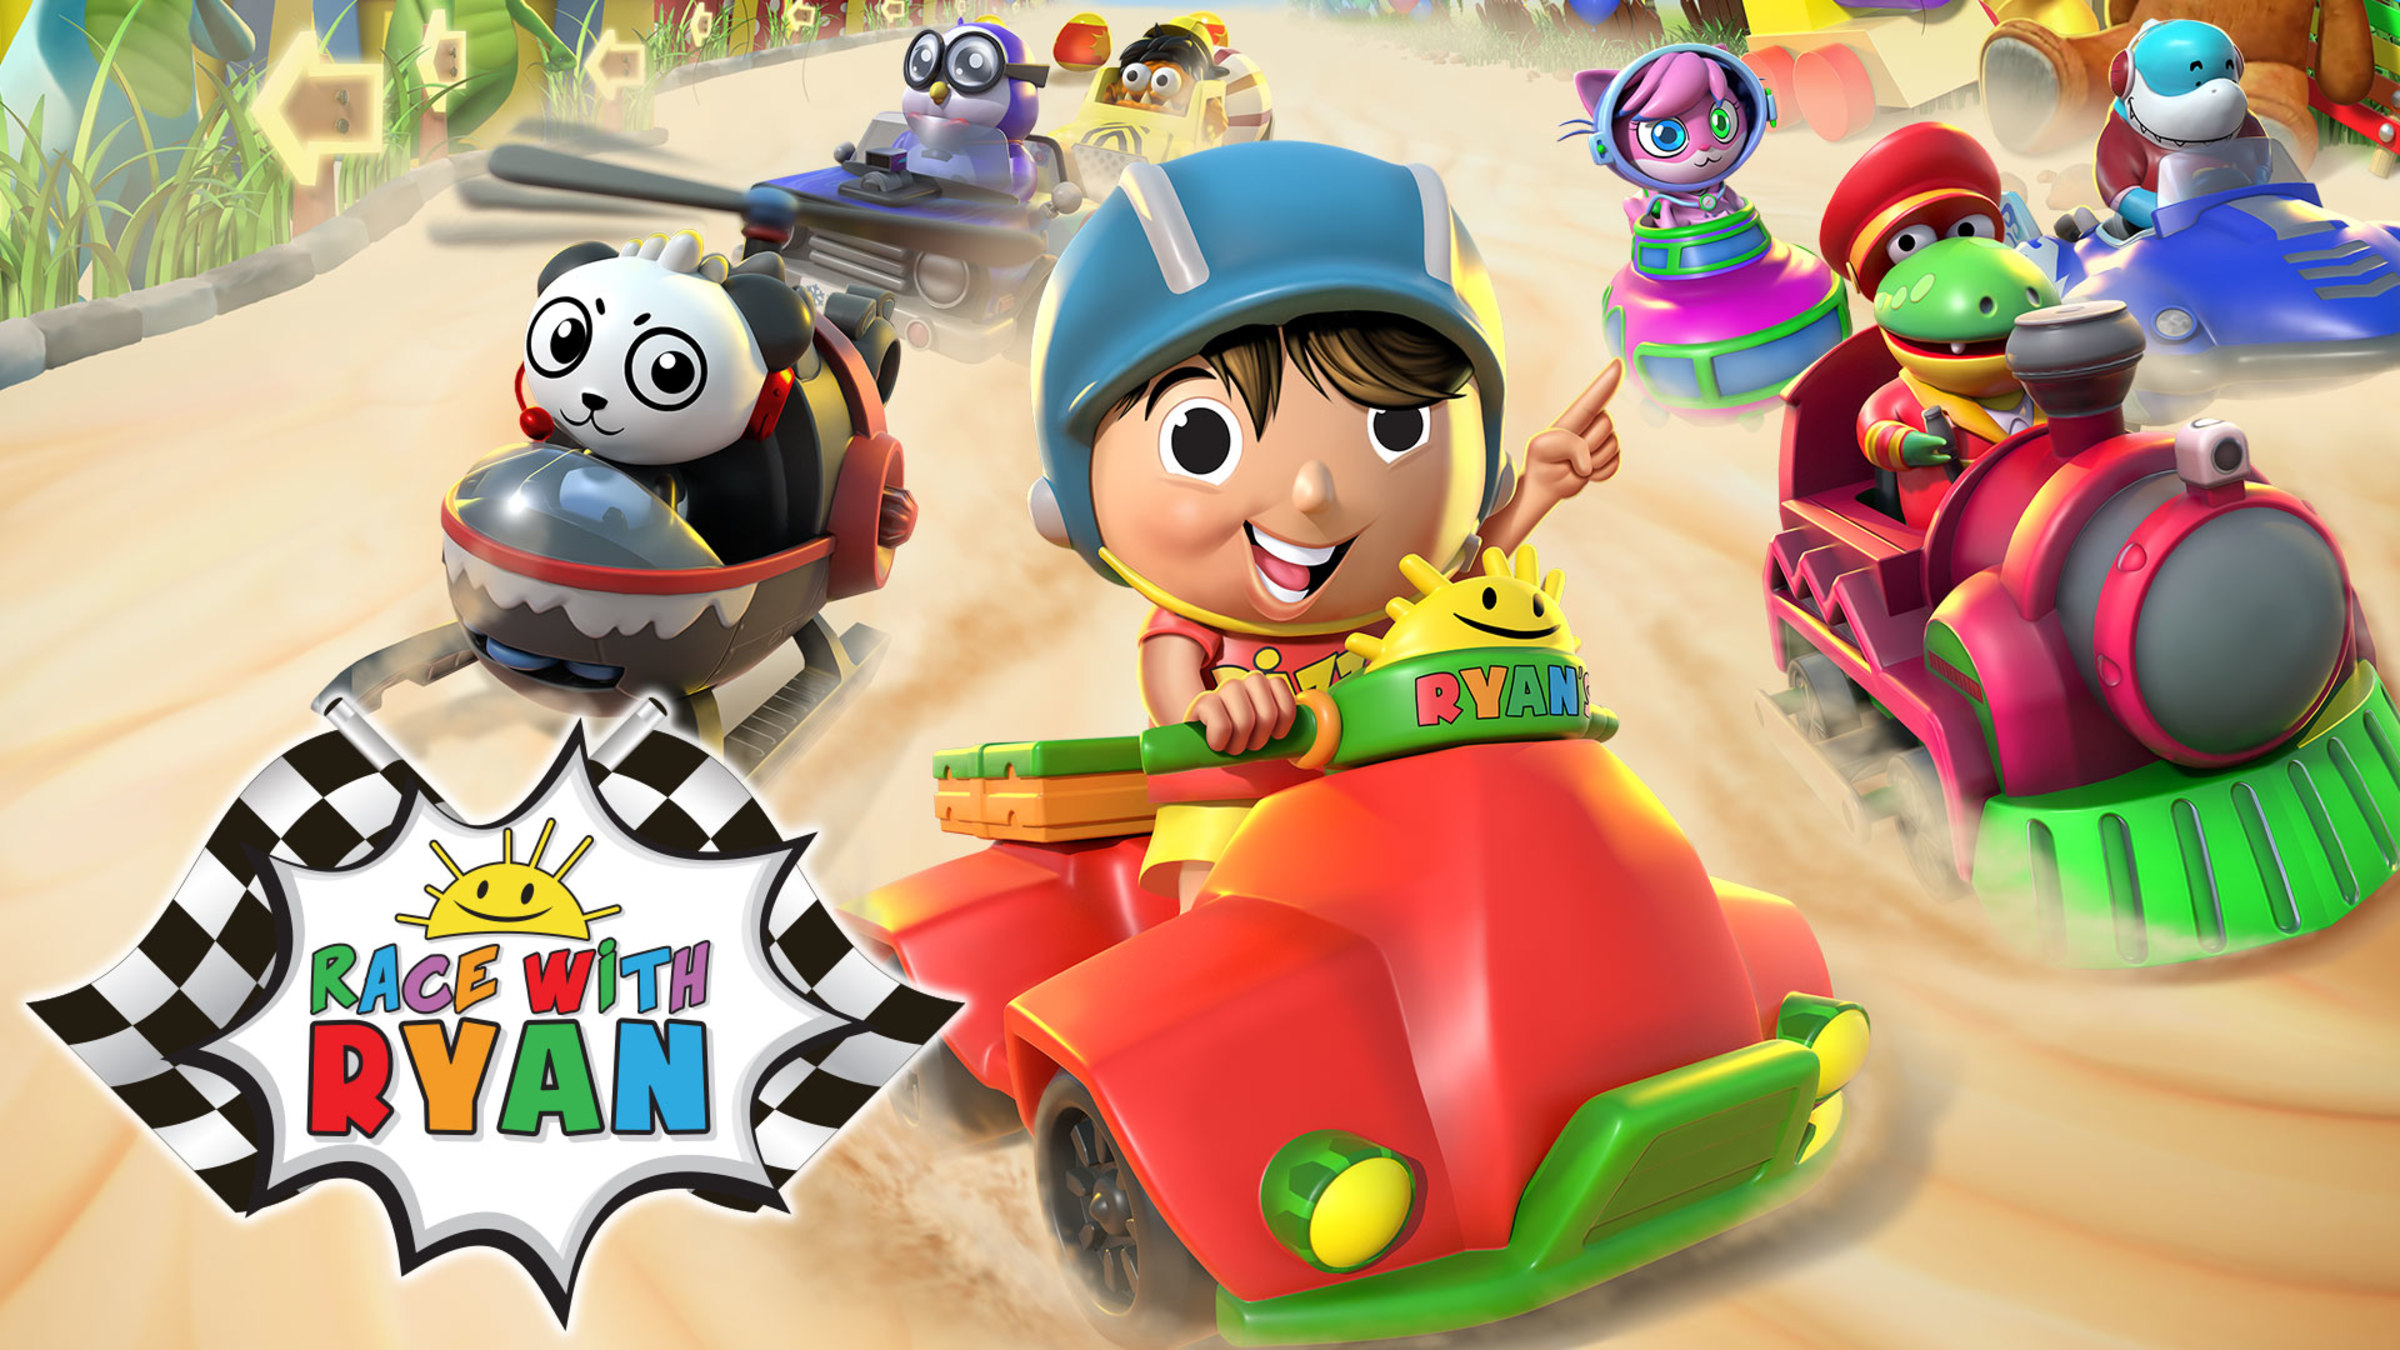 Race with Ryan for Nintendo Switch - Nintendo Official Site